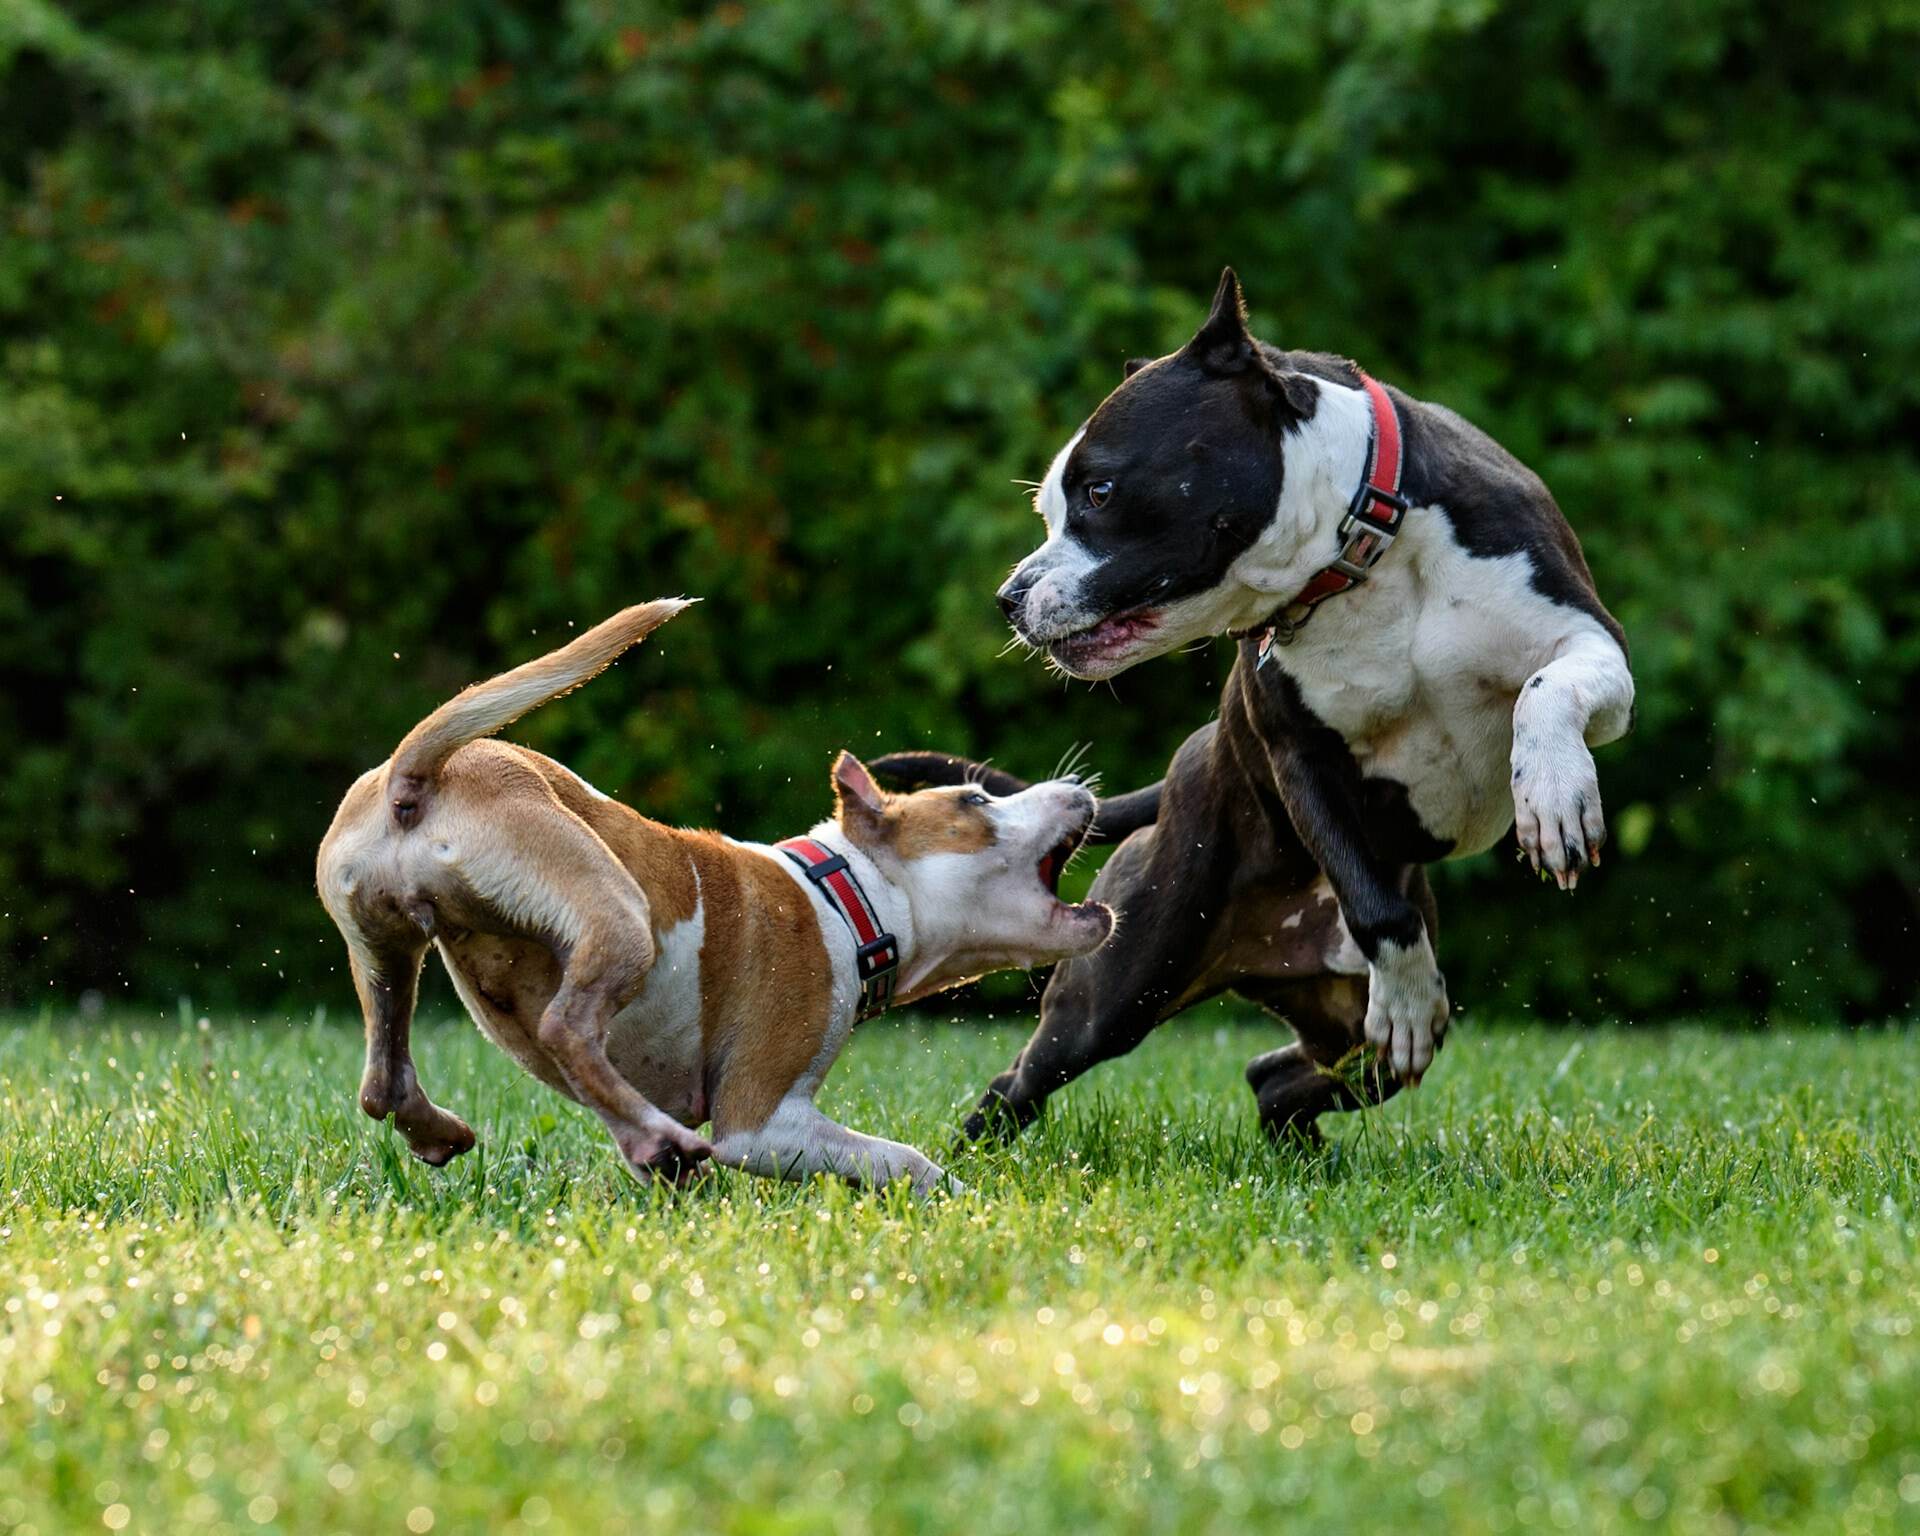 A pair of dogs play fighting at a dog park